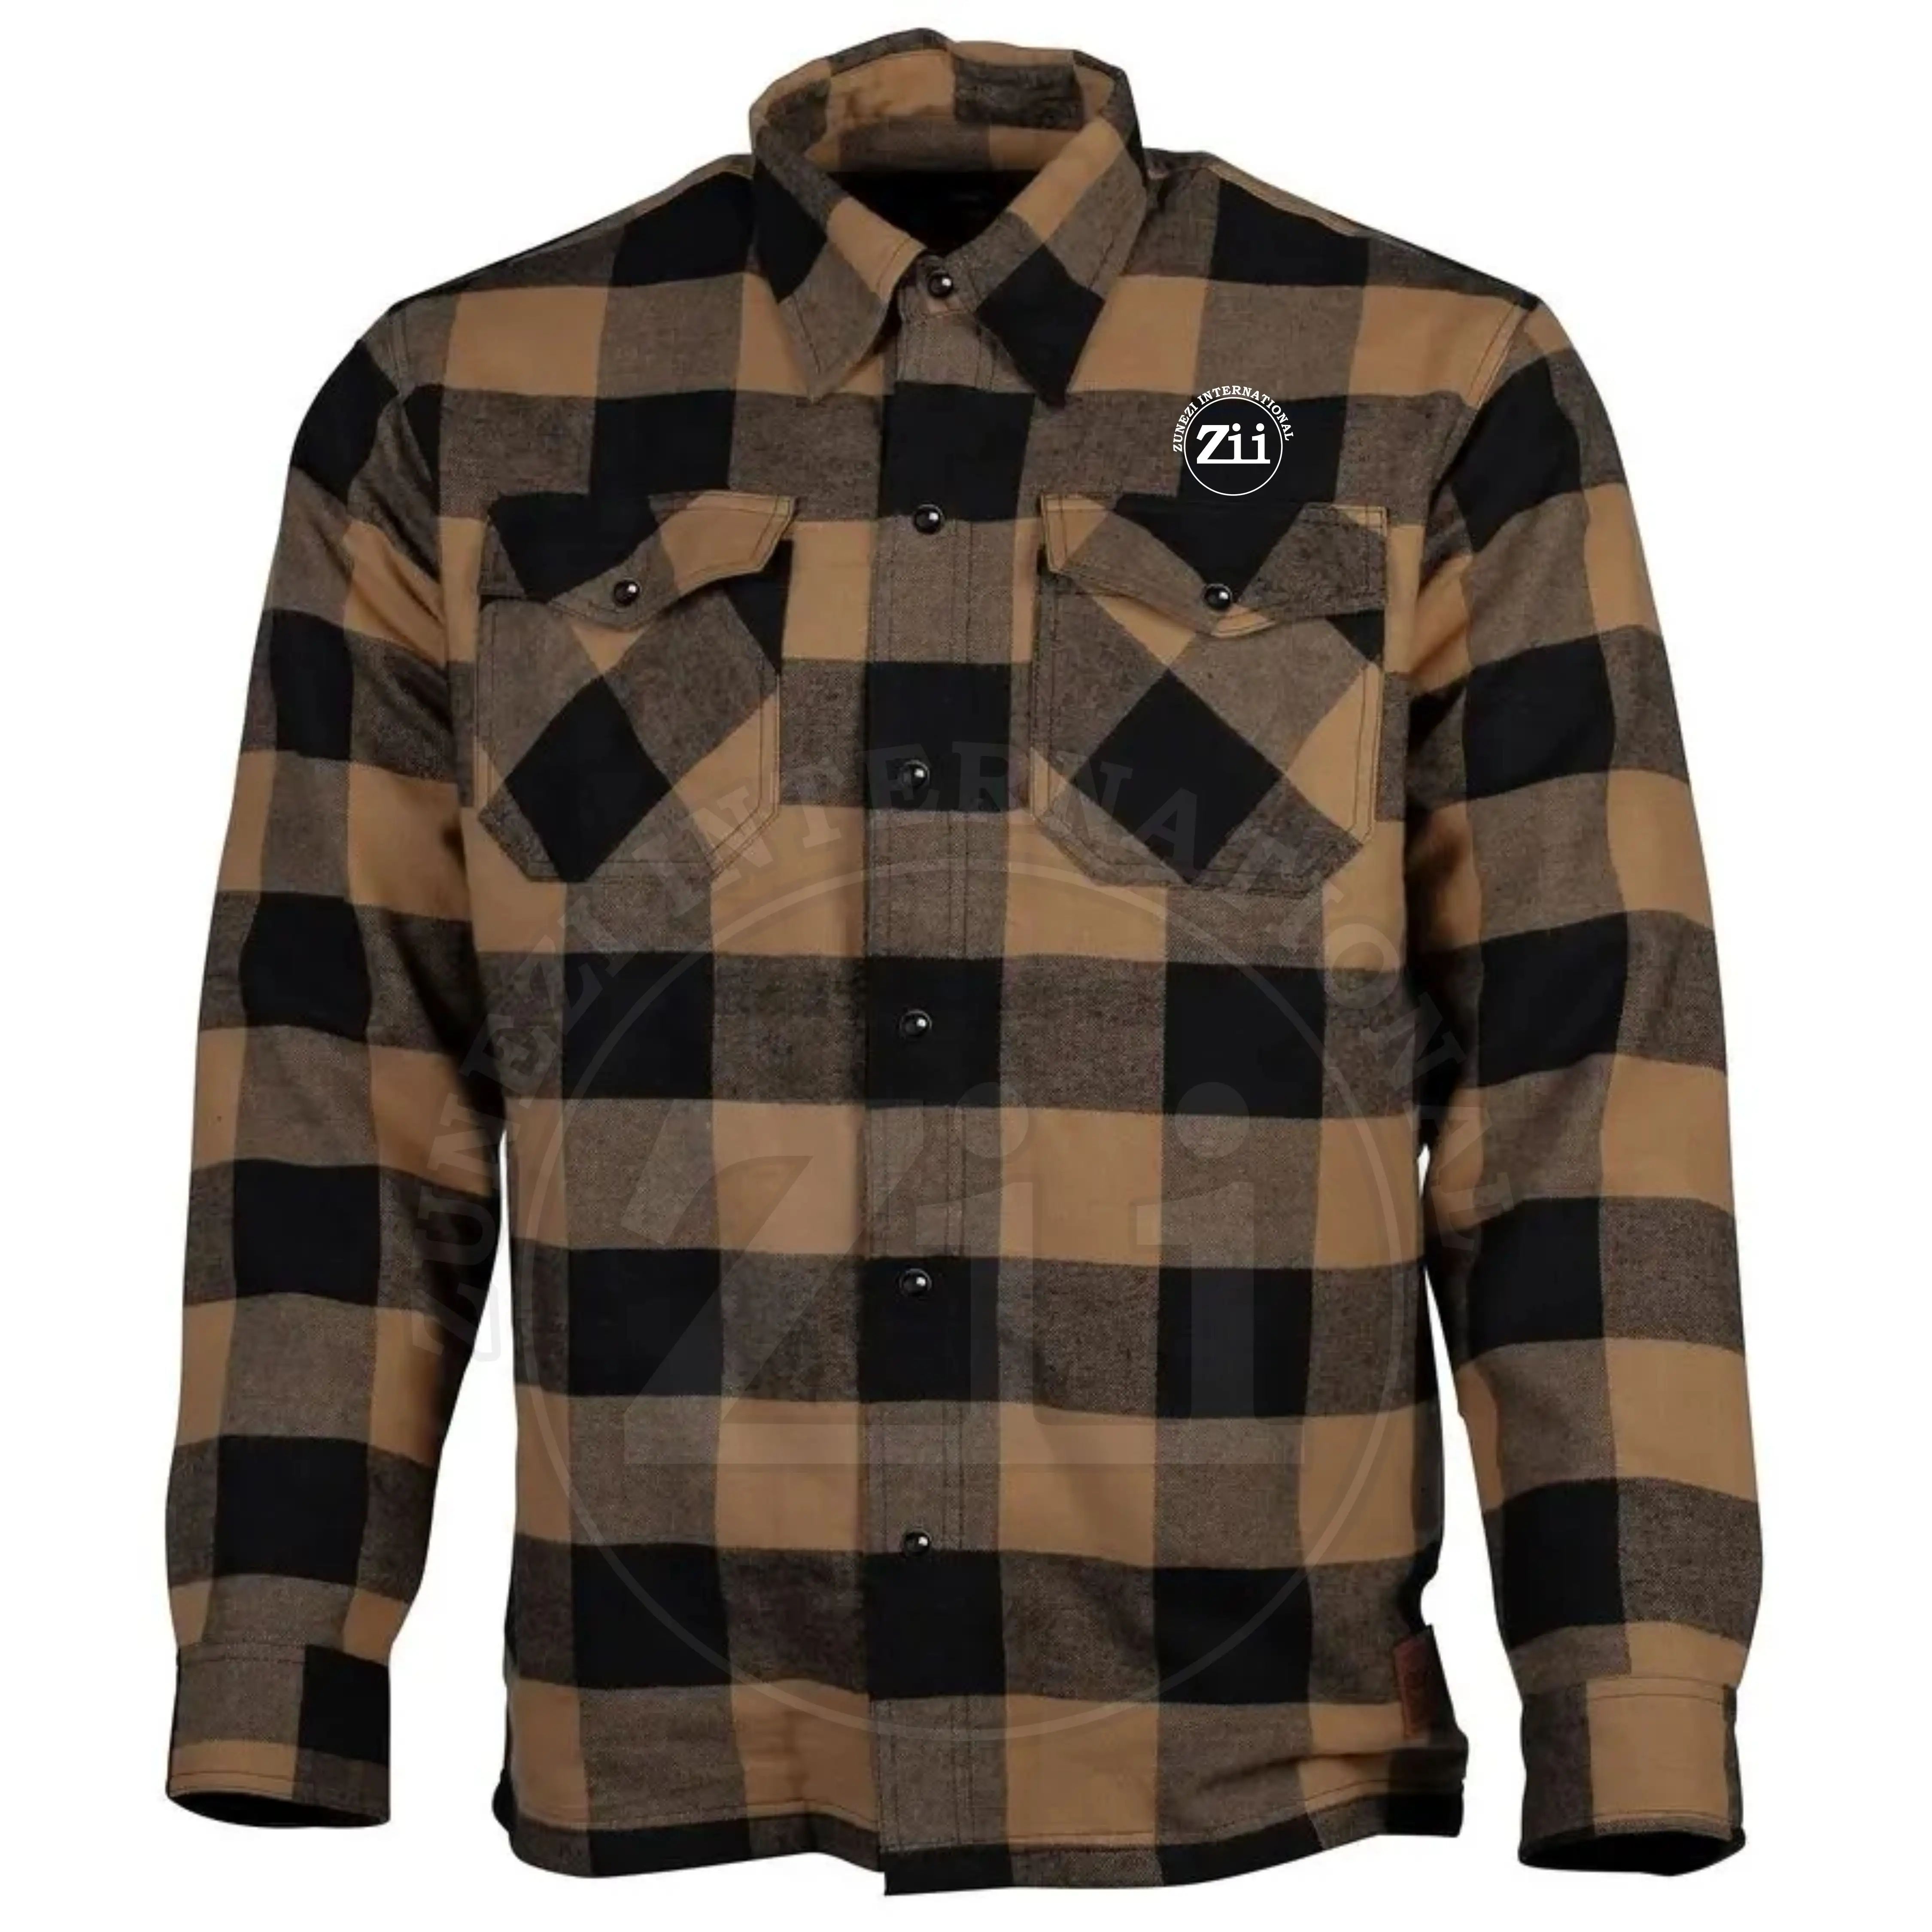 Men's Breathable 100% Cotton Biker Flannel Shirt CE Armor Protective Motorcycle Gear Plus Size Available with custom logo